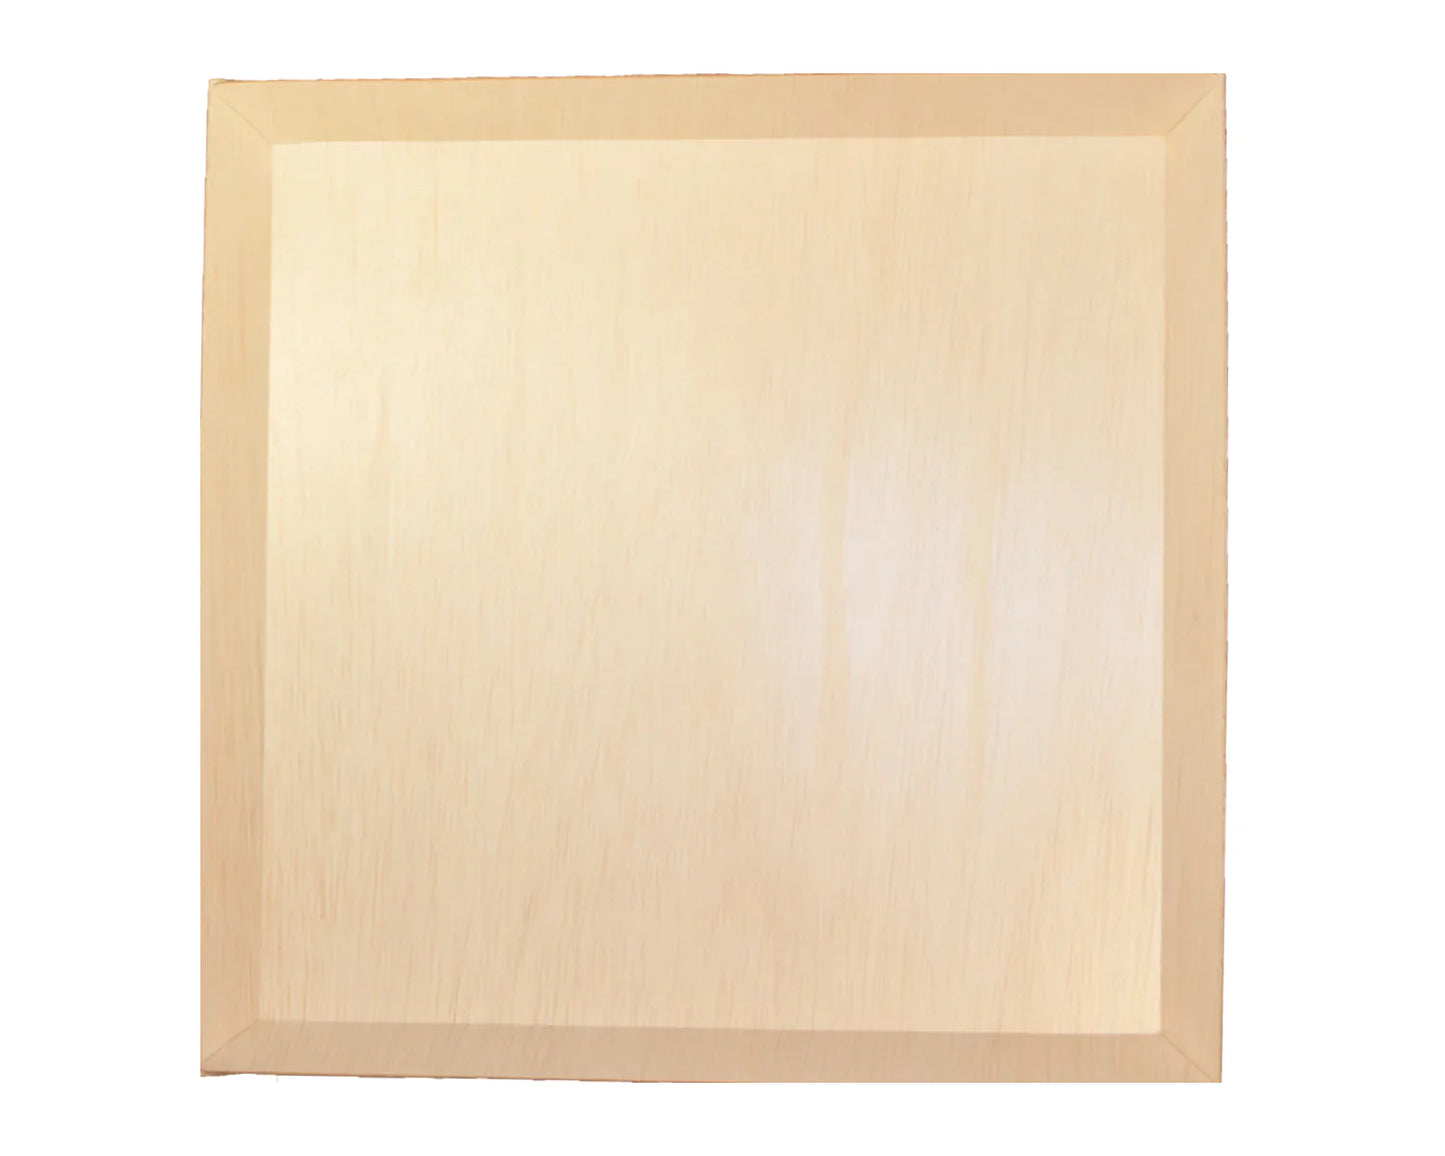 12" x 12" x 1" Square Tray | Fixed Side | Large (Case of 100)